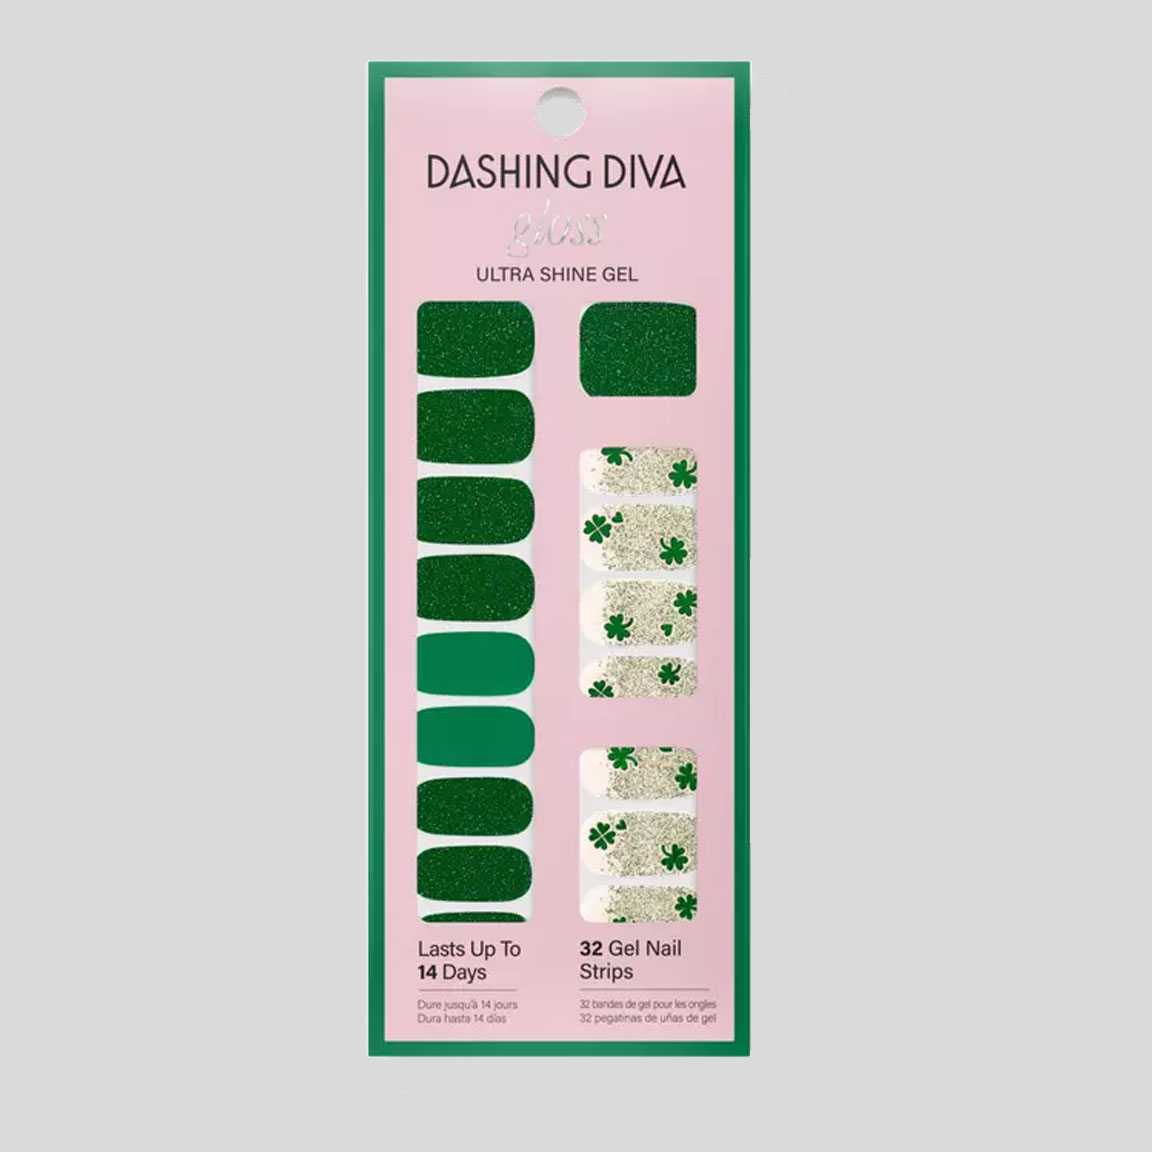 Dashing Diva Patty Party Gloss Ultra Shine Gel Nail Strips in different shades of green